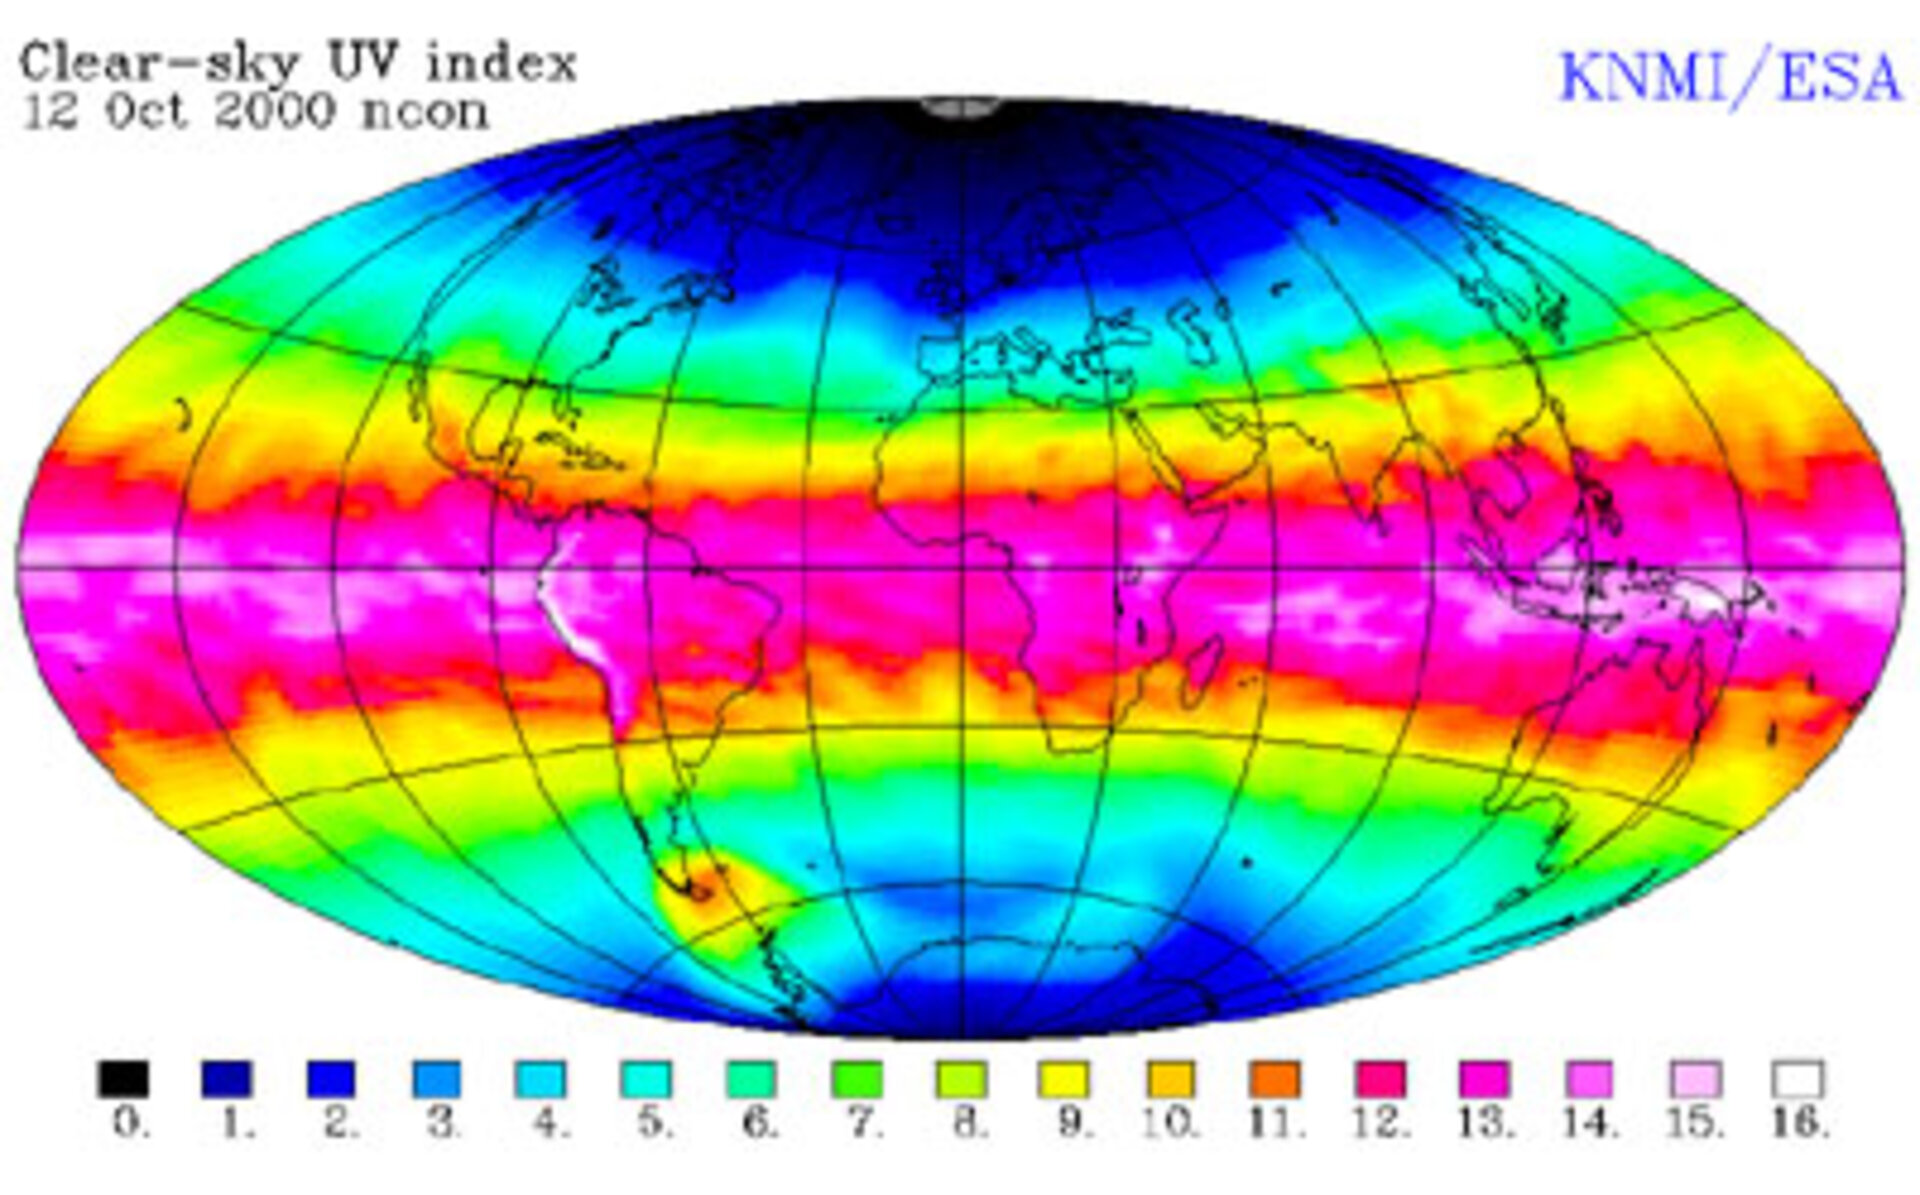 High UV radiation over South America due to the Ozone Hole